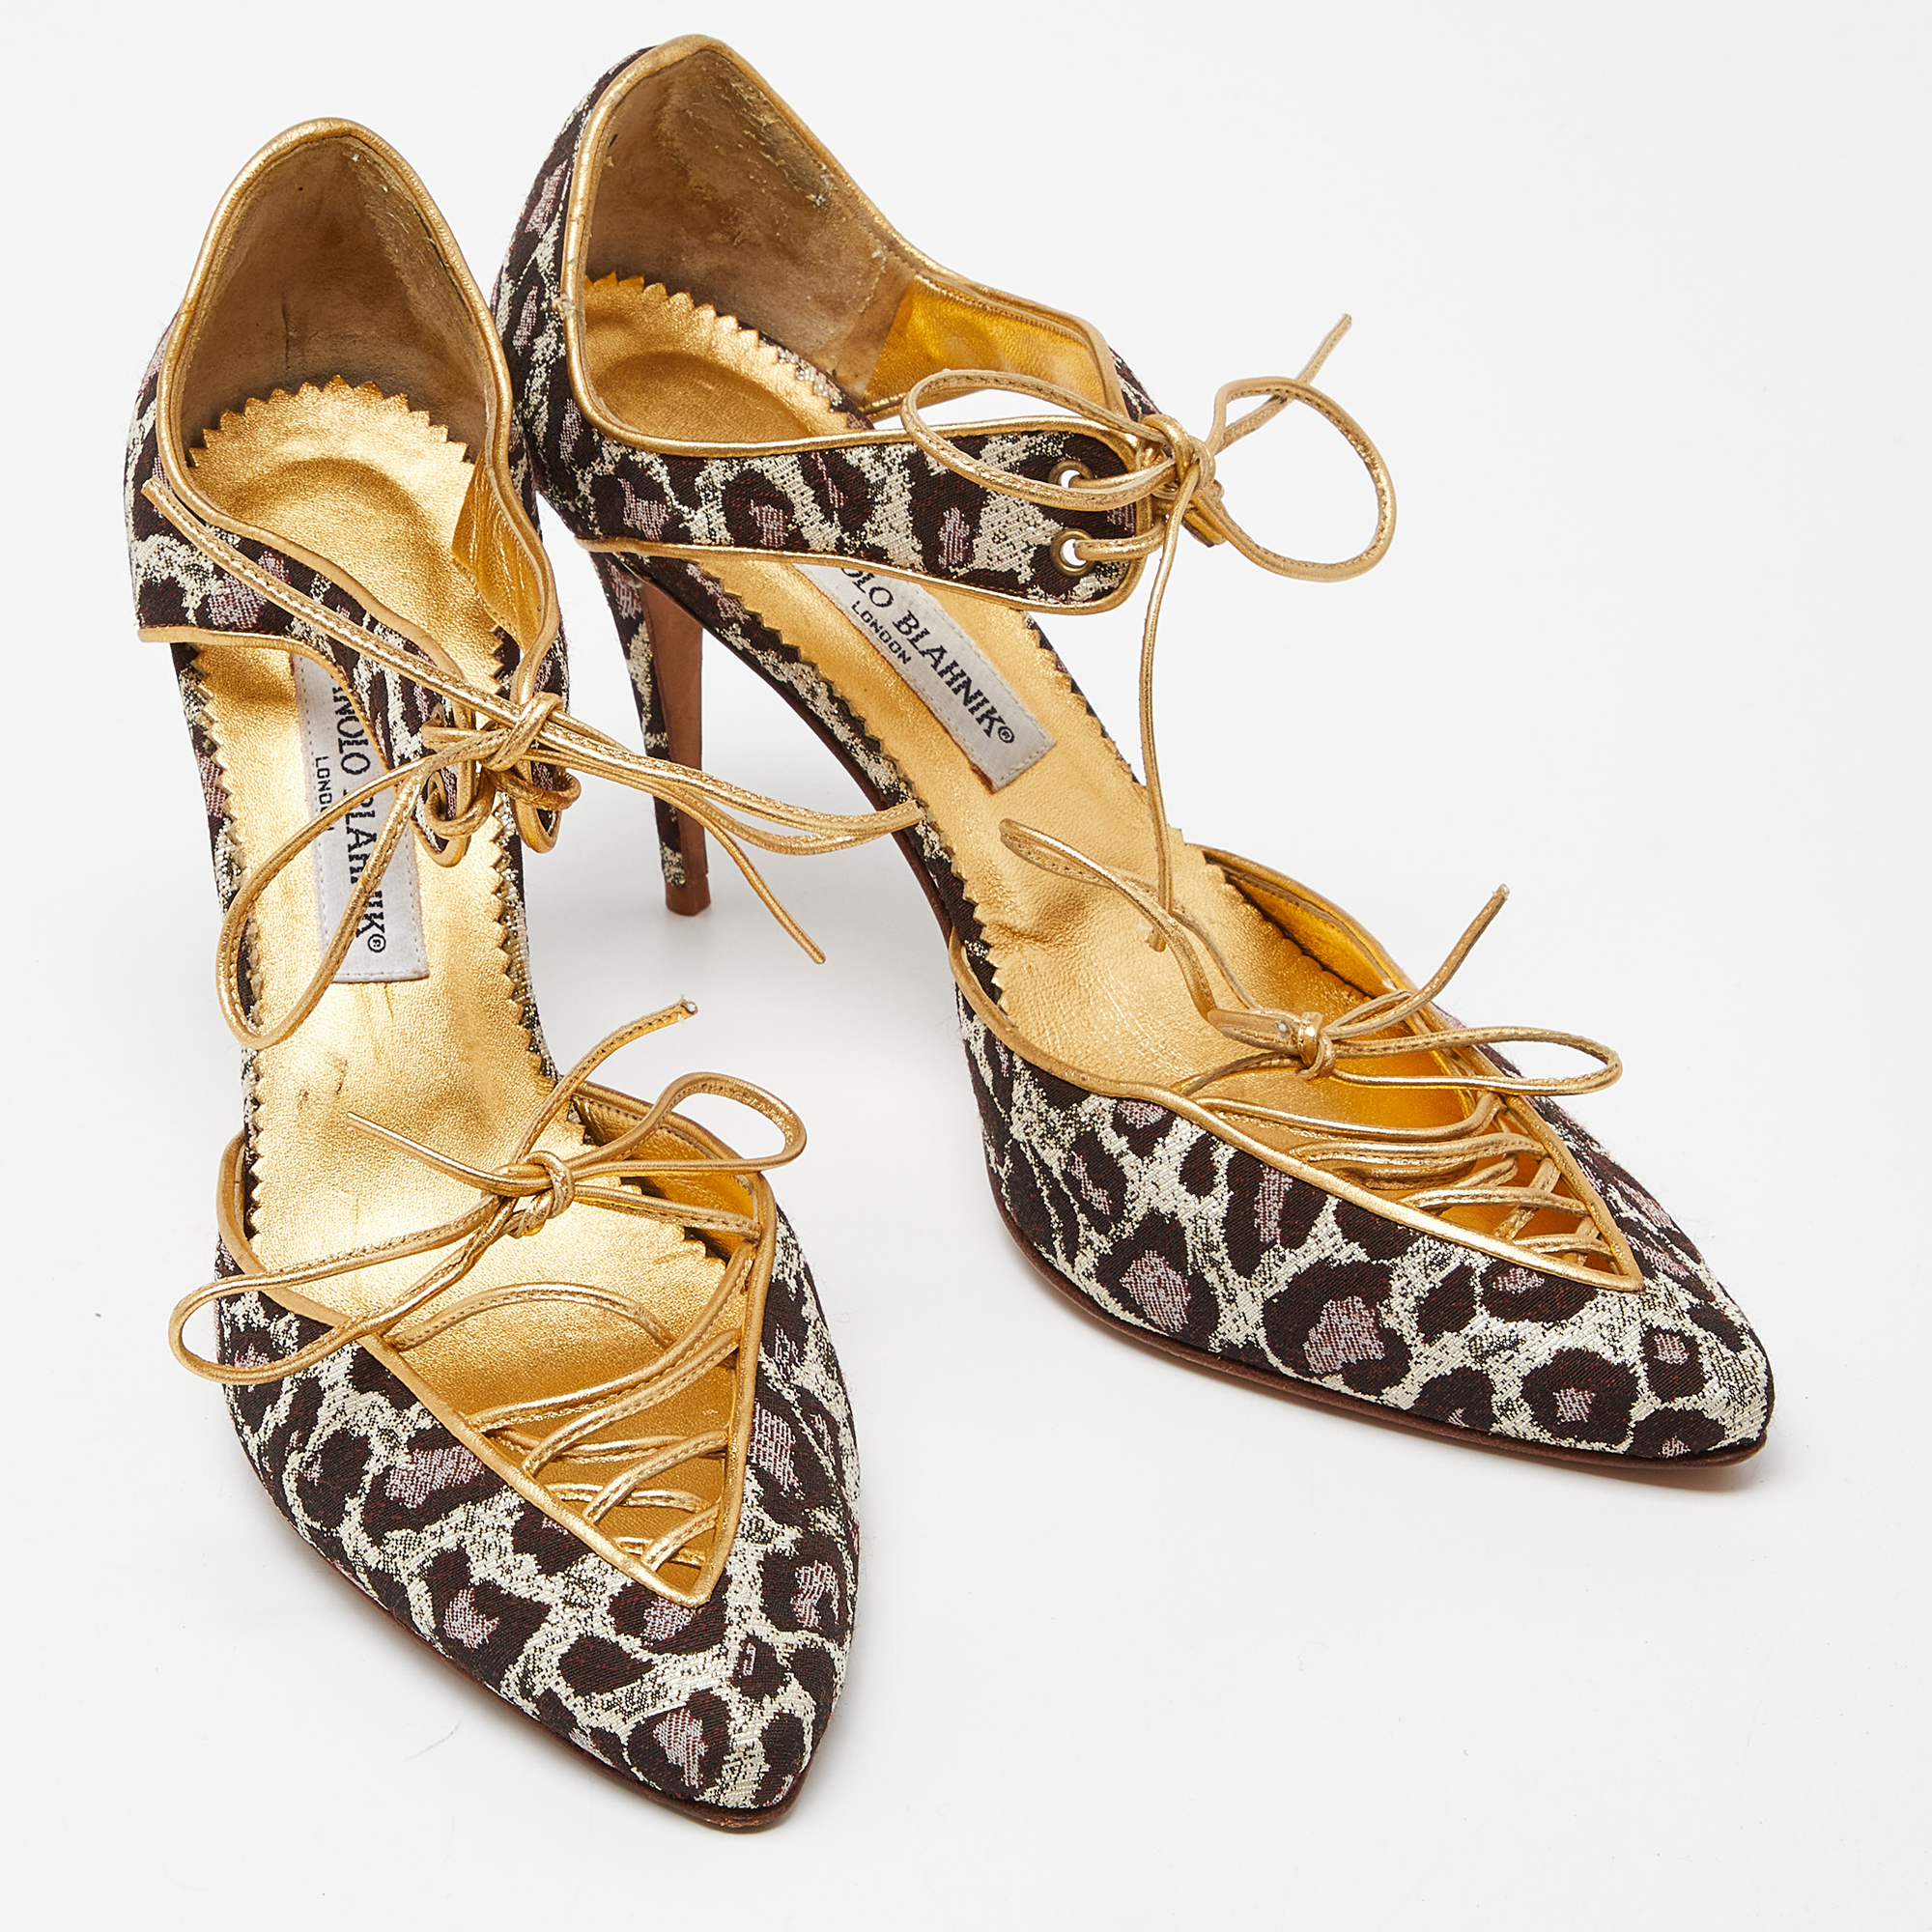 Manolo Blahnik Multicolor Brown/Gold Brocade Fabric And Leather Lace Up Pointed Toe Pumps Size 40